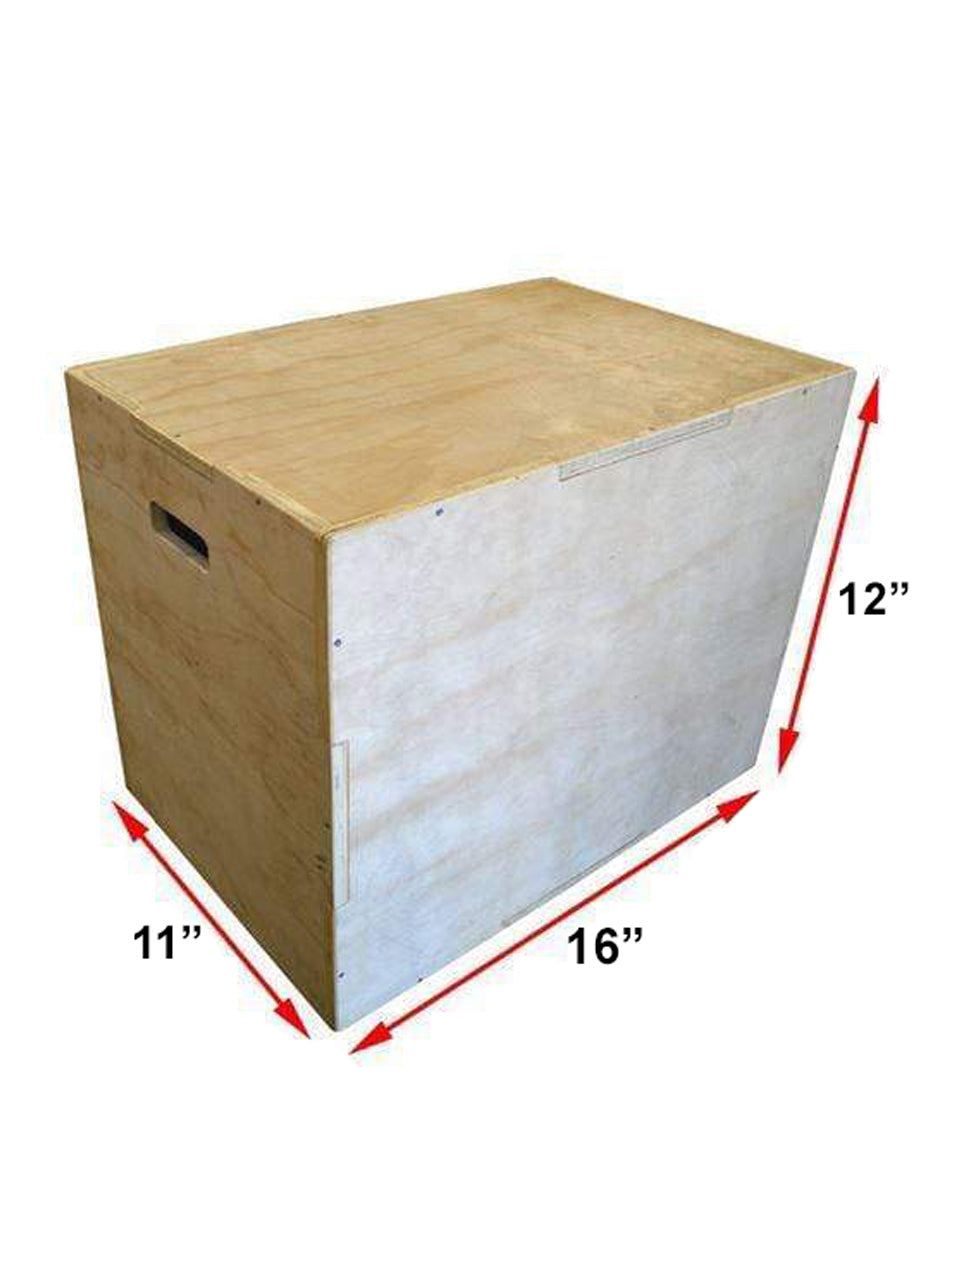 3 IN 1 Wooden Plyo Box Small in Size - (12'' x 11'' x 16'' Inches)